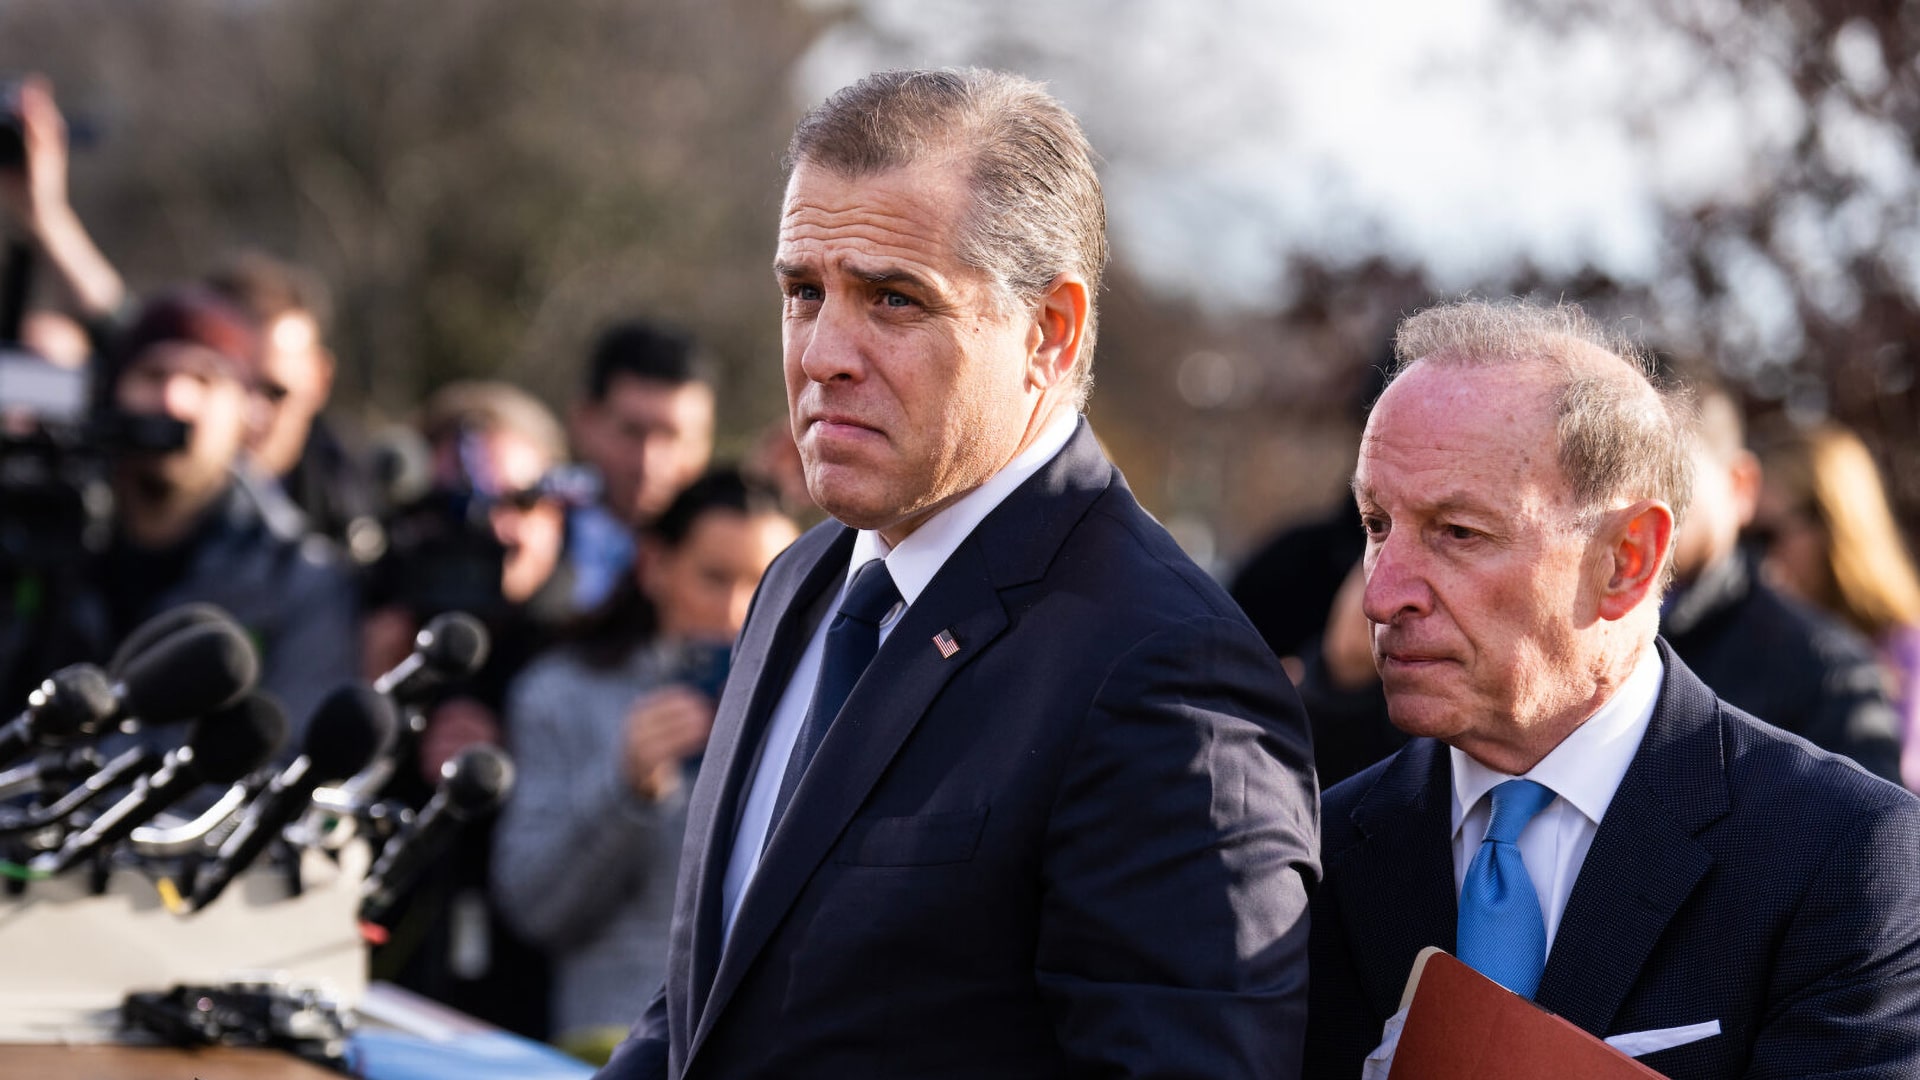 Attorney and businessman Hunter Biden (son of Joseph Biden) on the left, lawyer Abbe Lowell on the right, surrounded by a gaggle of reporters asking about Biden's potential testimony before the House of Representatives about his foreign business dealings Tom Williams/CQ Roll Call, Wiki Commons.